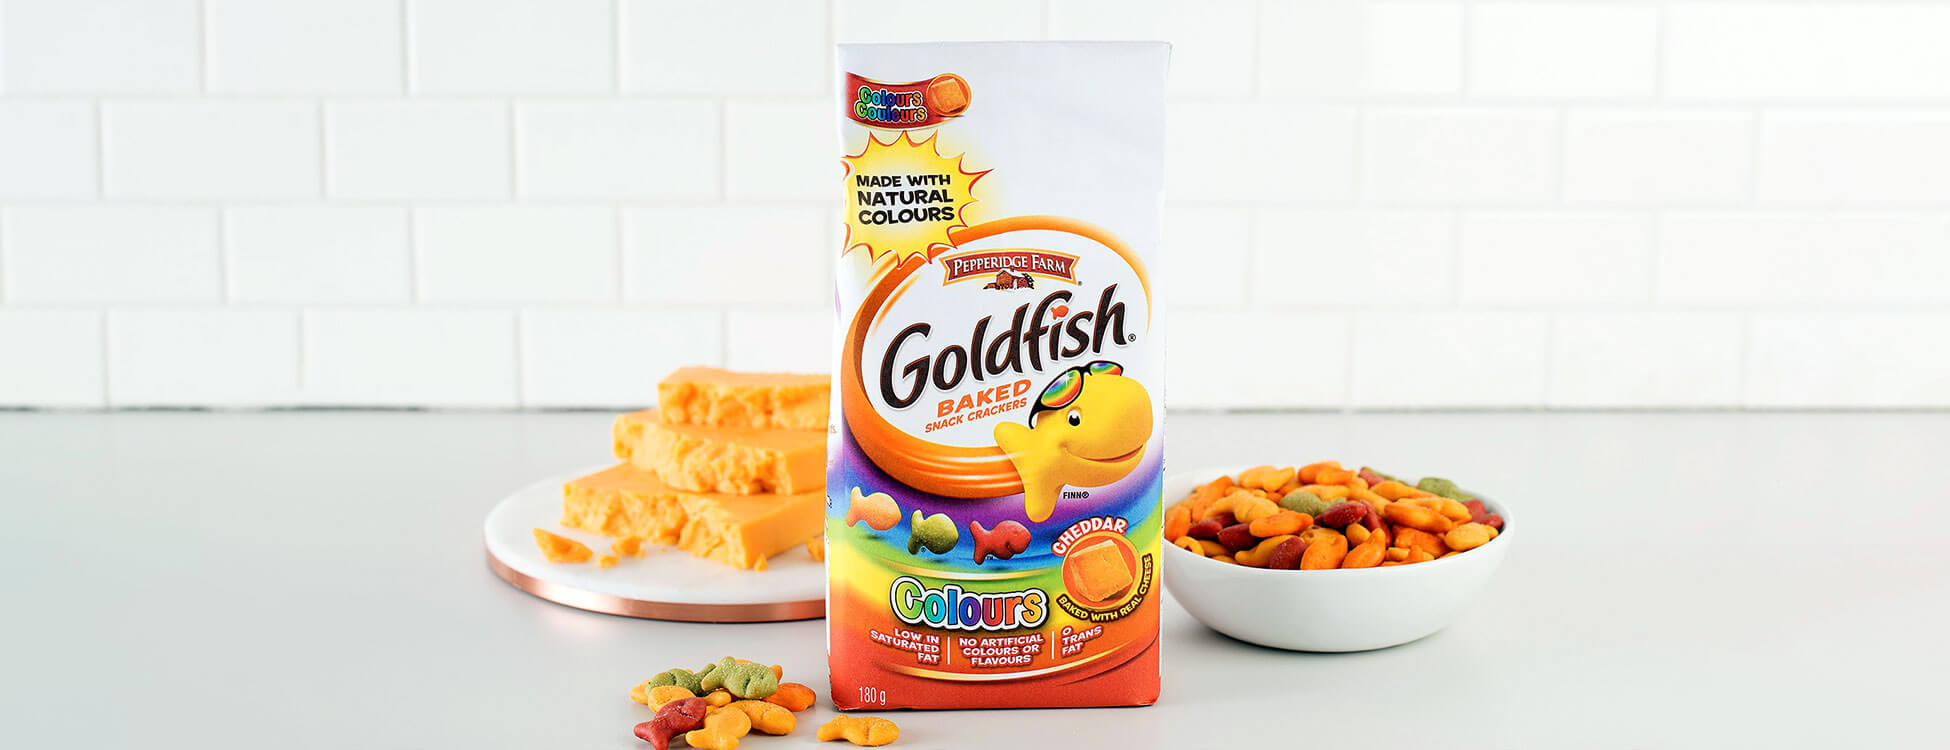 Goldfish® Baked Snack Crackers Colours | Cheddar